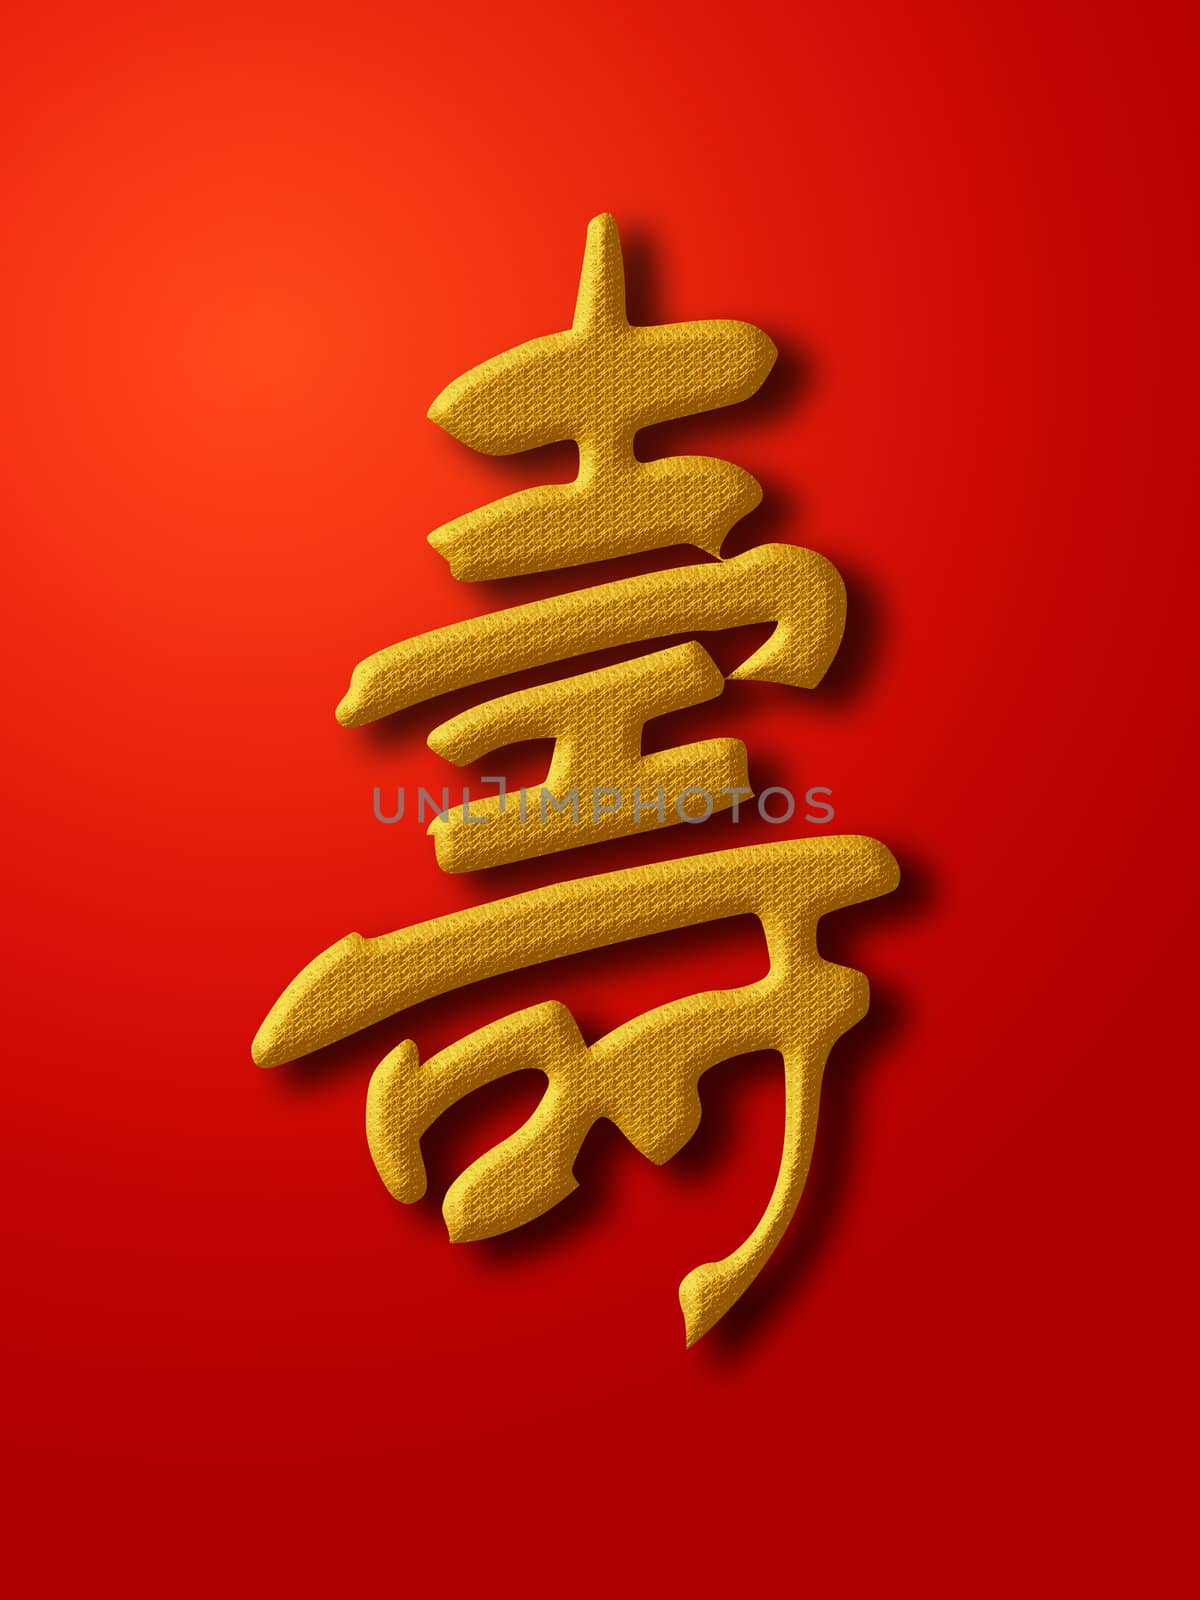 Longevity Chinese Calligraphy Gold on Red Background Illustration